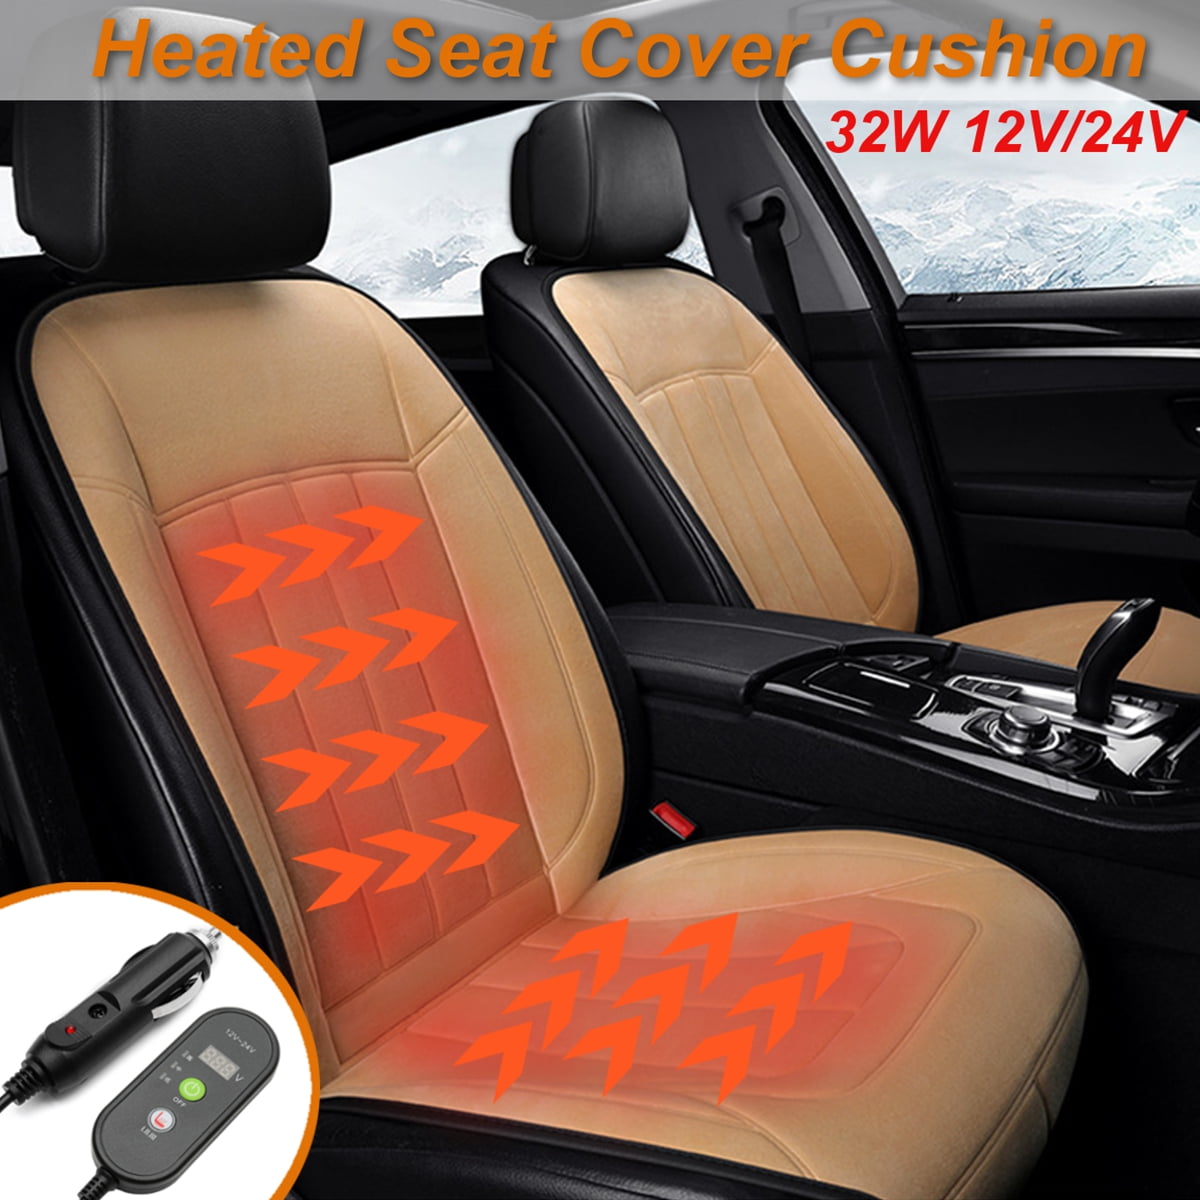 Black TEWLEN Car Heated Seat Cushion Universal 12V Heated Seat Cover for Car Heated Pad with Time Temperature Controller Adjustable Heating Levels Car Seat Warmer Heater 